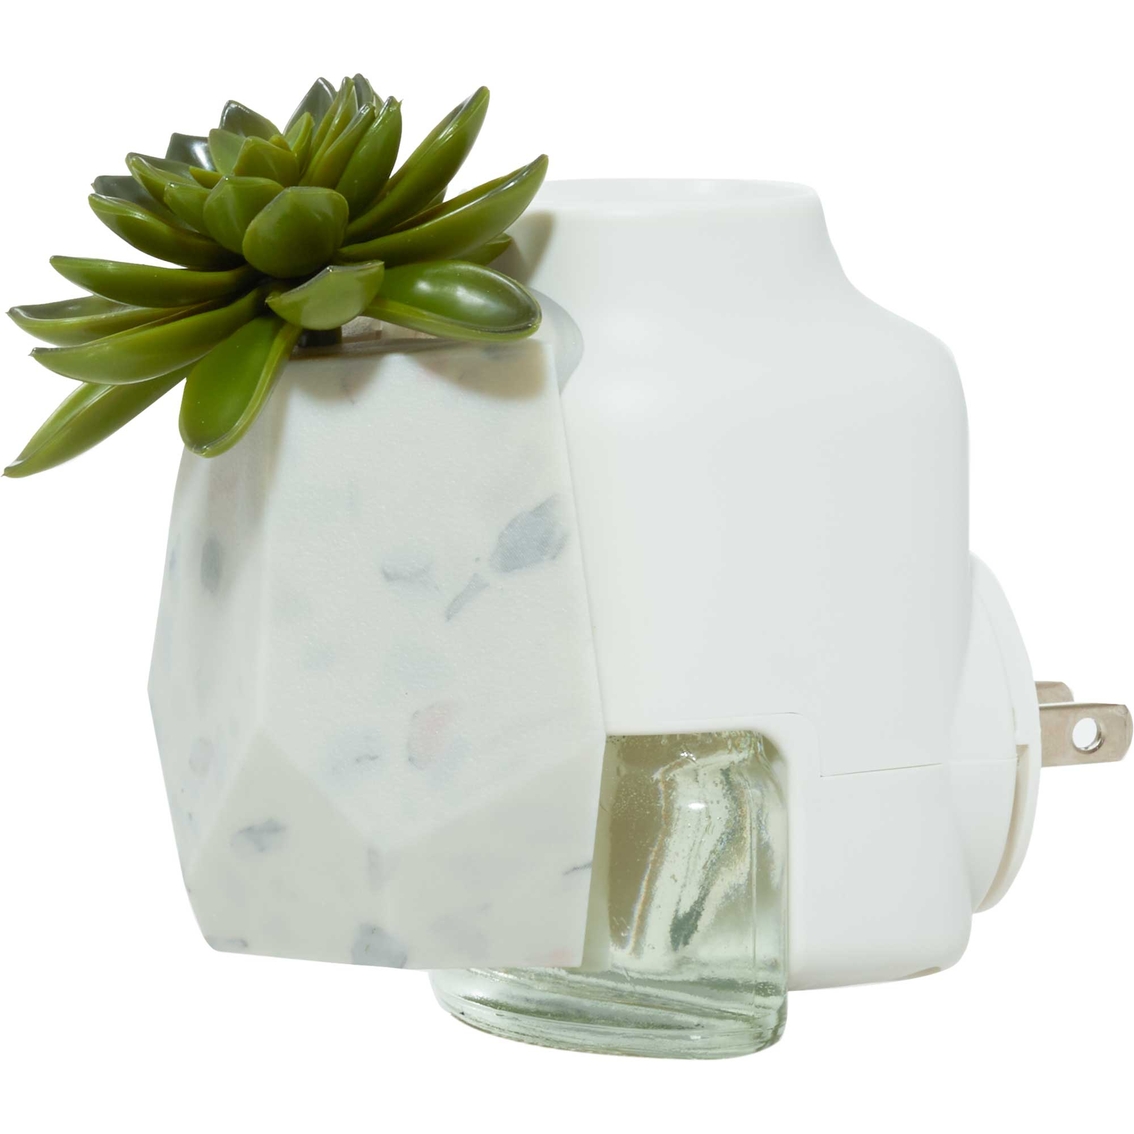 Yankee Candle Succulent ScentPlug Diffuser - Image 3 of 3